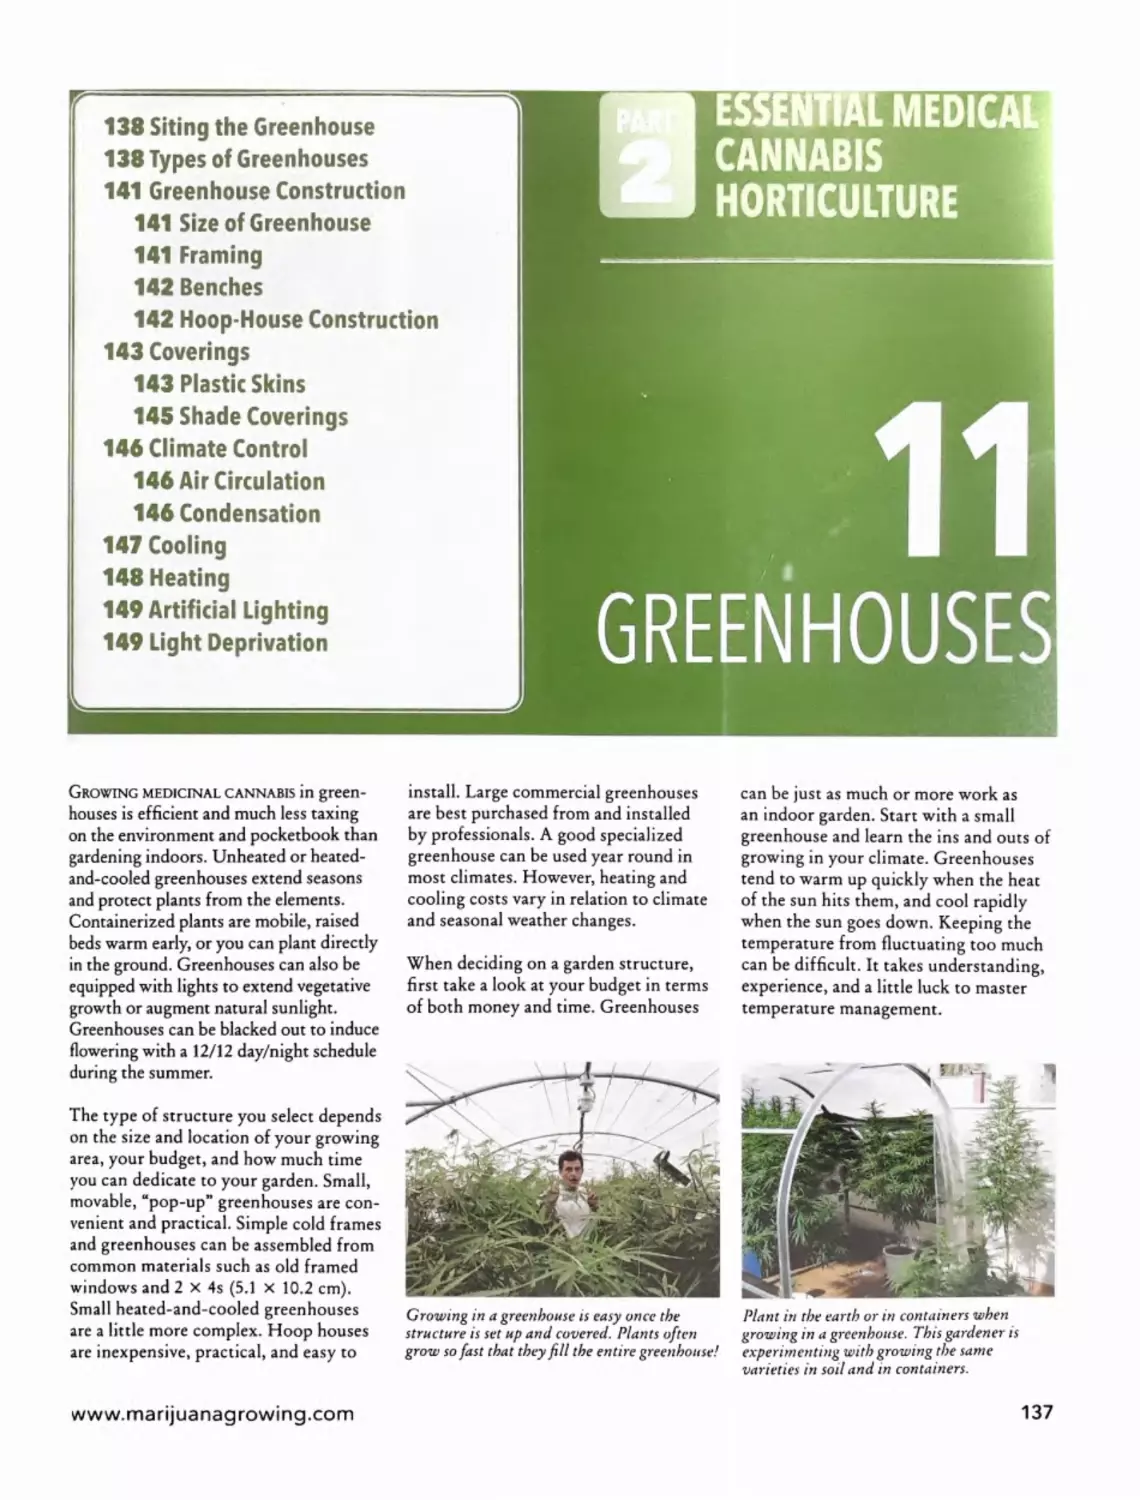 Chapter 11 - Greenhouses